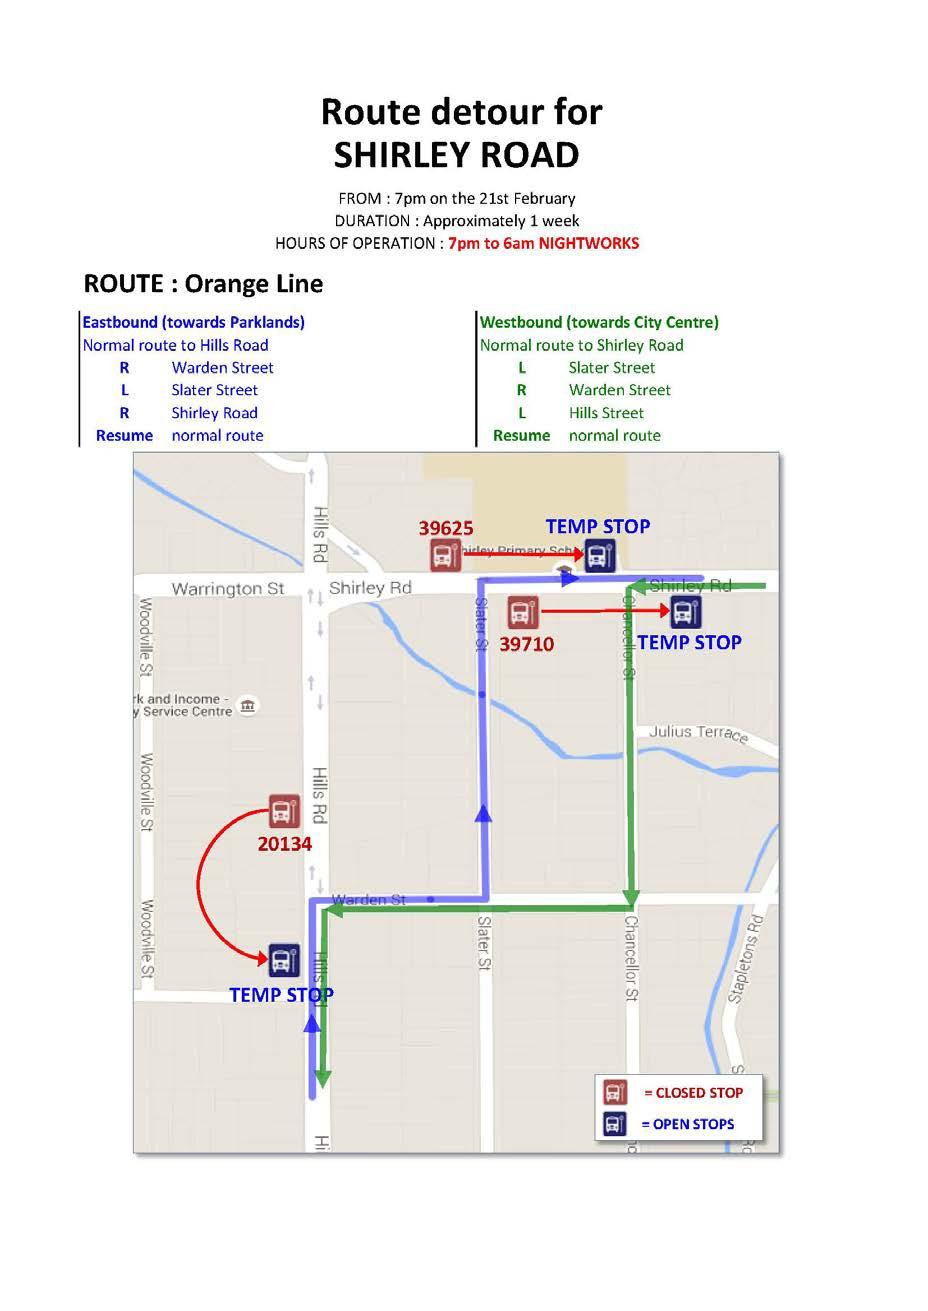 Example of - Closure/Detour notification: (Currently produced by ECan,